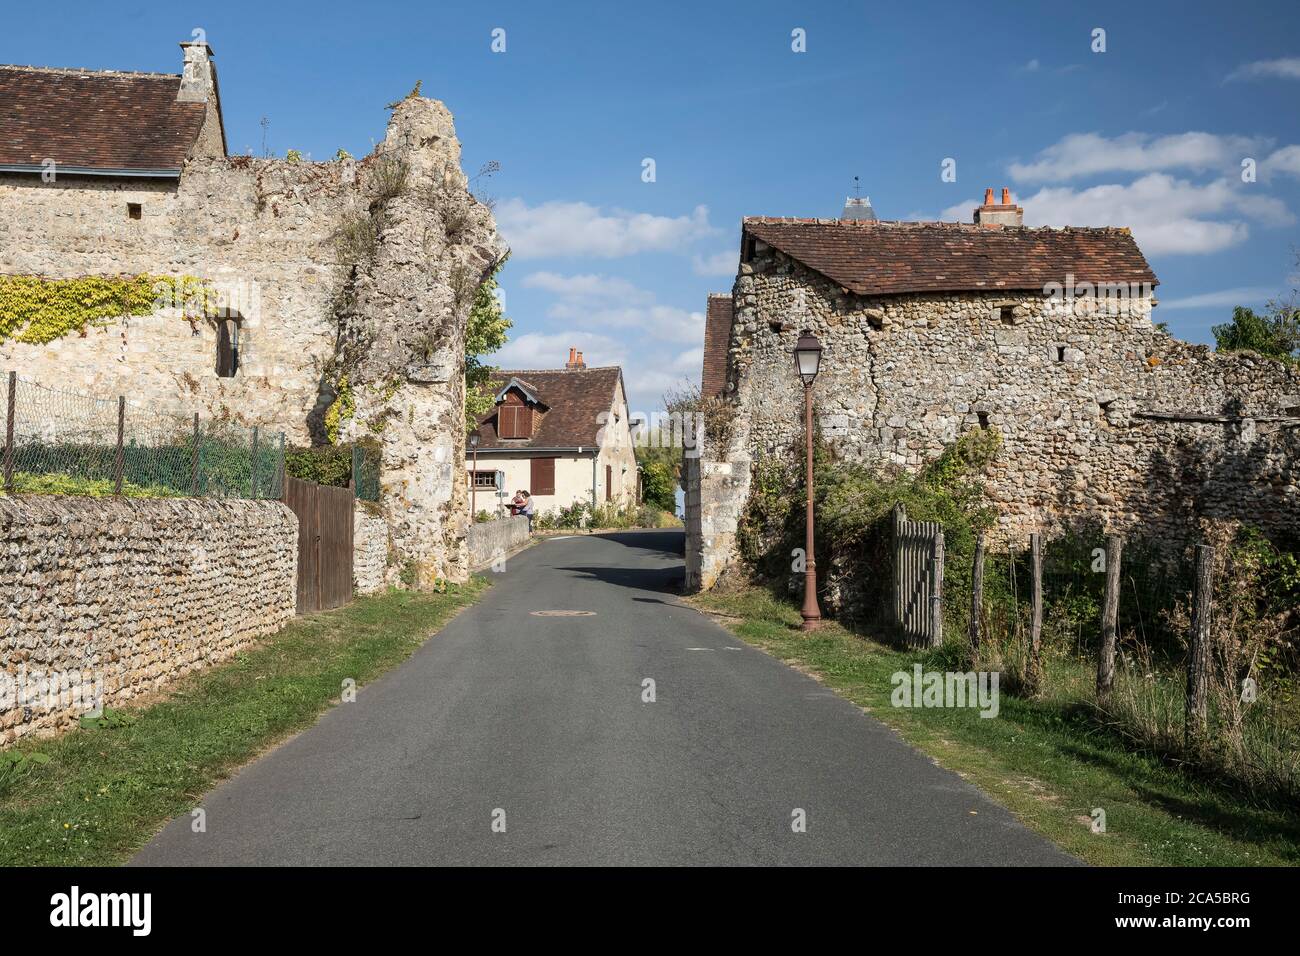 France, Loir et Cher, Loire valley listed as World Heritage by UNESCO, Troo, cave village, old fortification Stock Photo